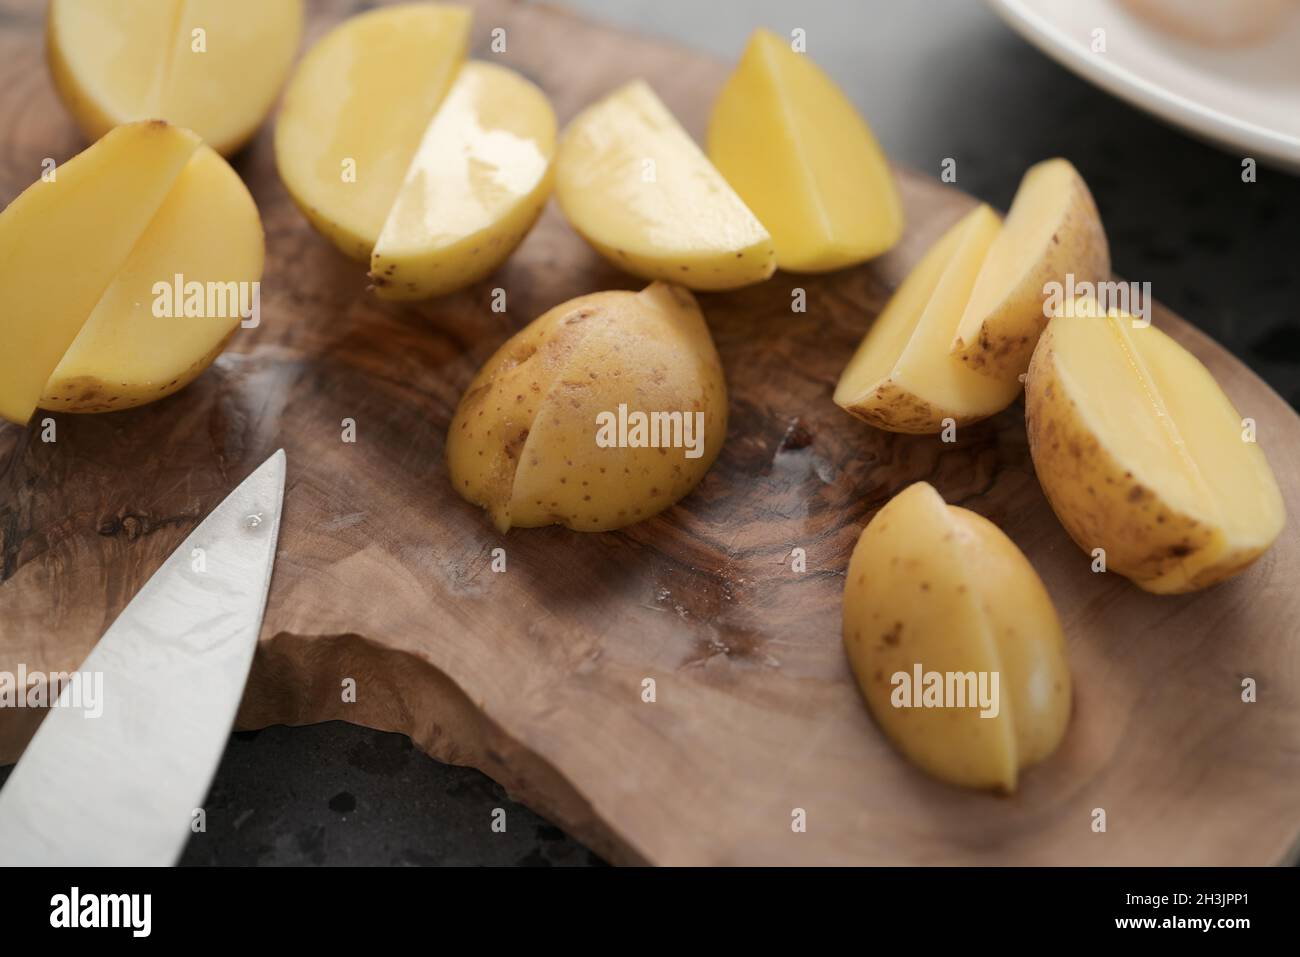 Raw washed and chopped baby potatoes ready to cook on olive wood board, shallow focus Stock Photo